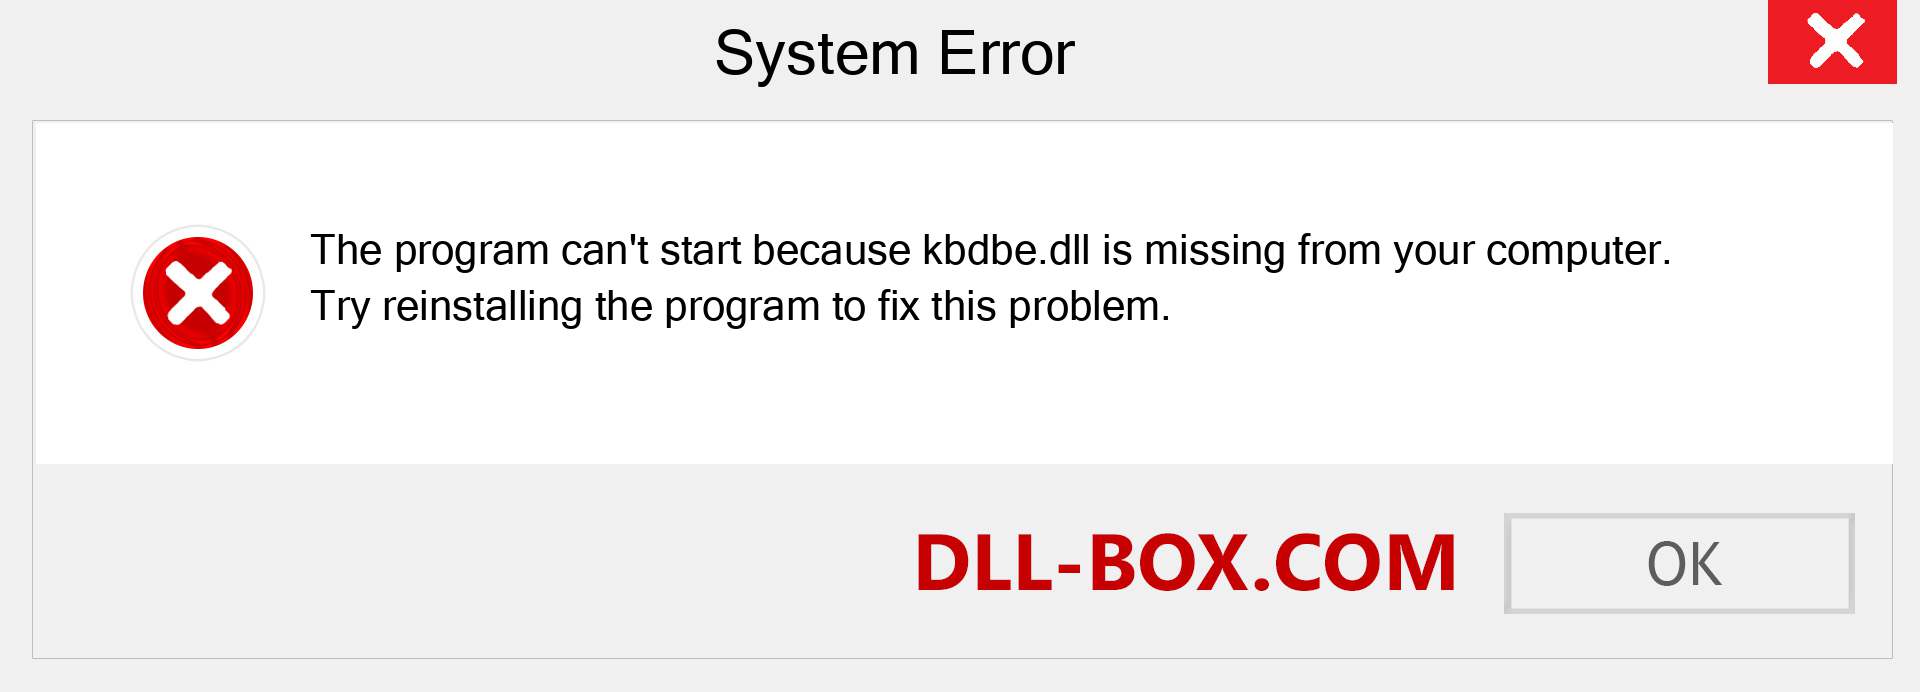  kbdbe.dll file is missing?. Download for Windows 7, 8, 10 - Fix  kbdbe dll Missing Error on Windows, photos, images